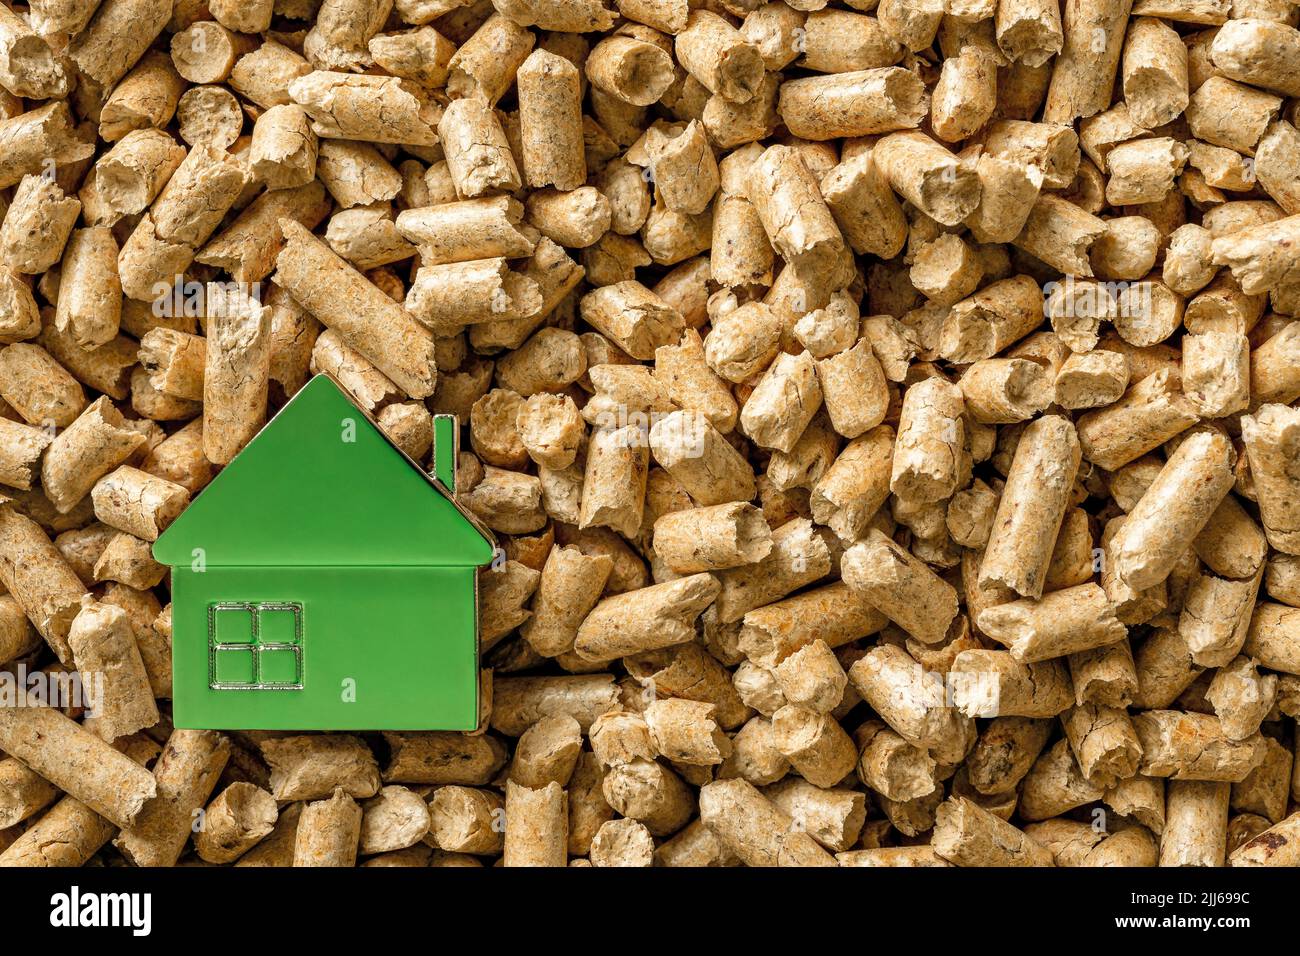 Small green house over wood pellets background. Alternative heating source for home. Organic renewable biofuel from compressed sawdust. Copy space. Stock Photo